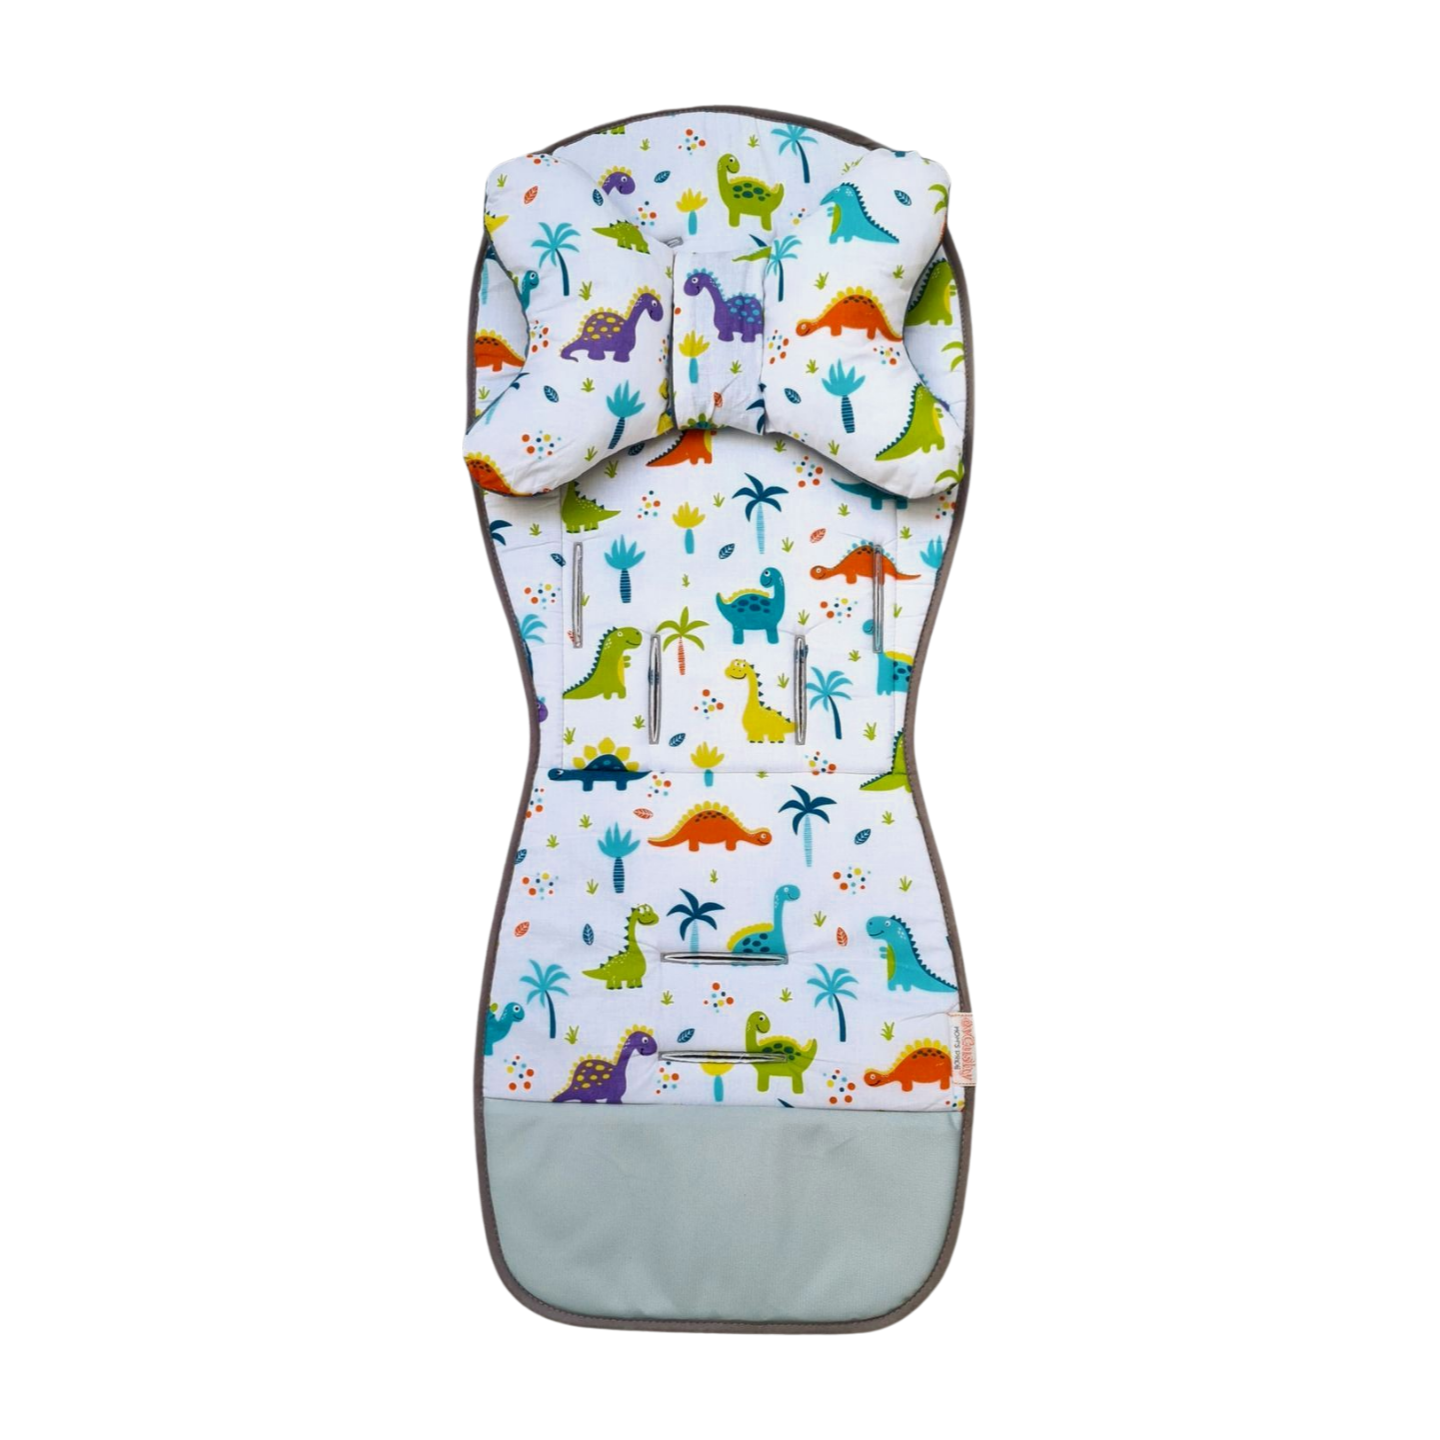 universal liner for prams strollers fits 5 point harness dinosaurs pattern 100% cotton with head support pillow